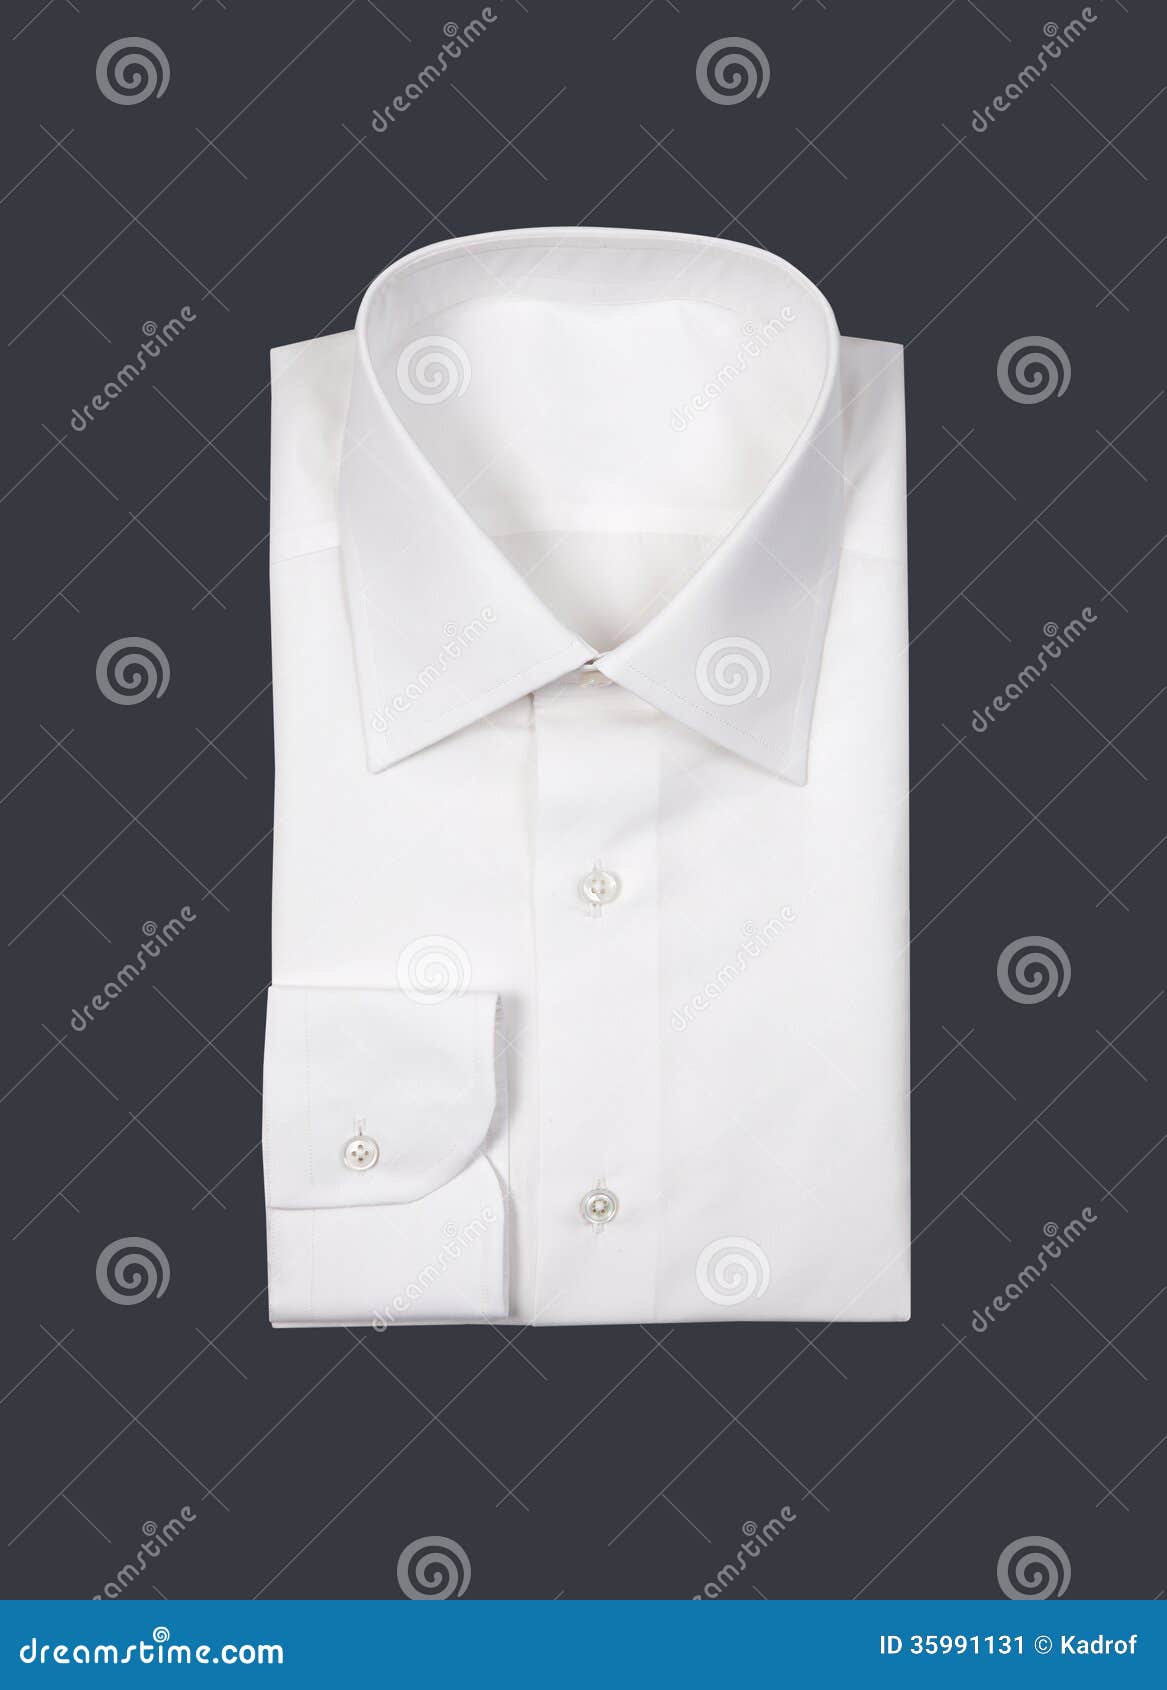 Folded white man shirt stock image. Image of clean, abstract - 35991131